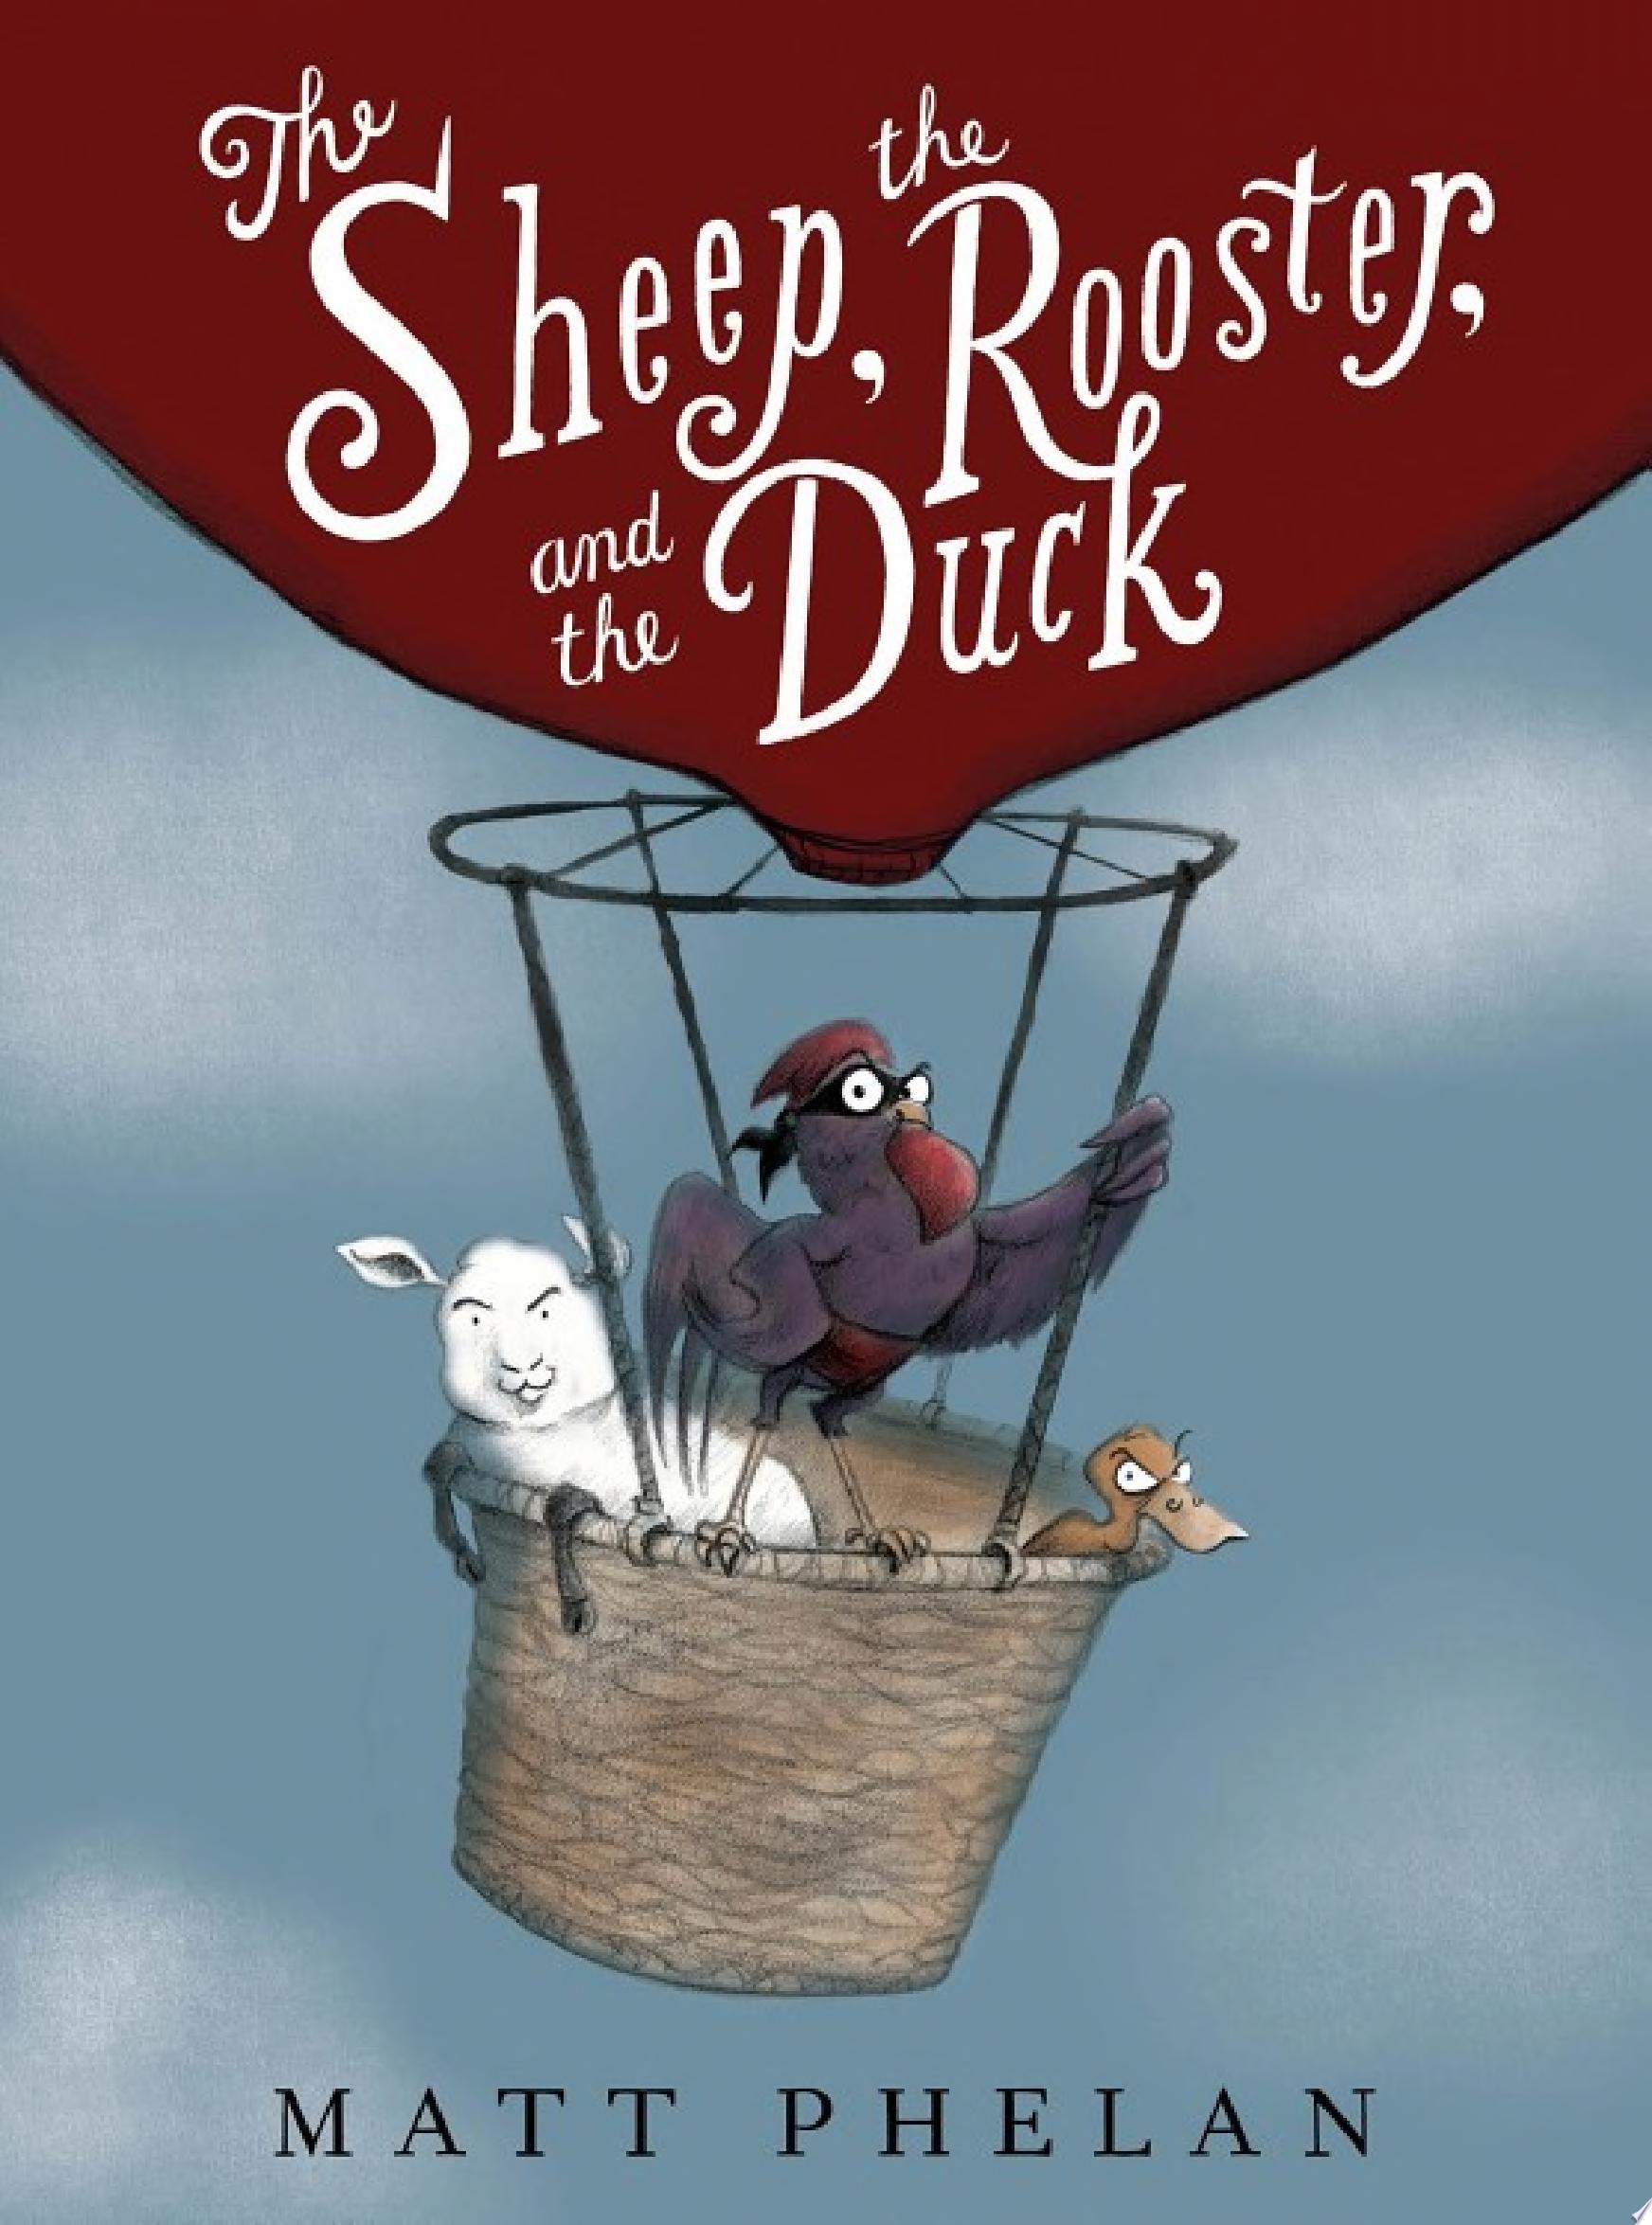 Image for "The Sheep, the Rooster, and the Duck"